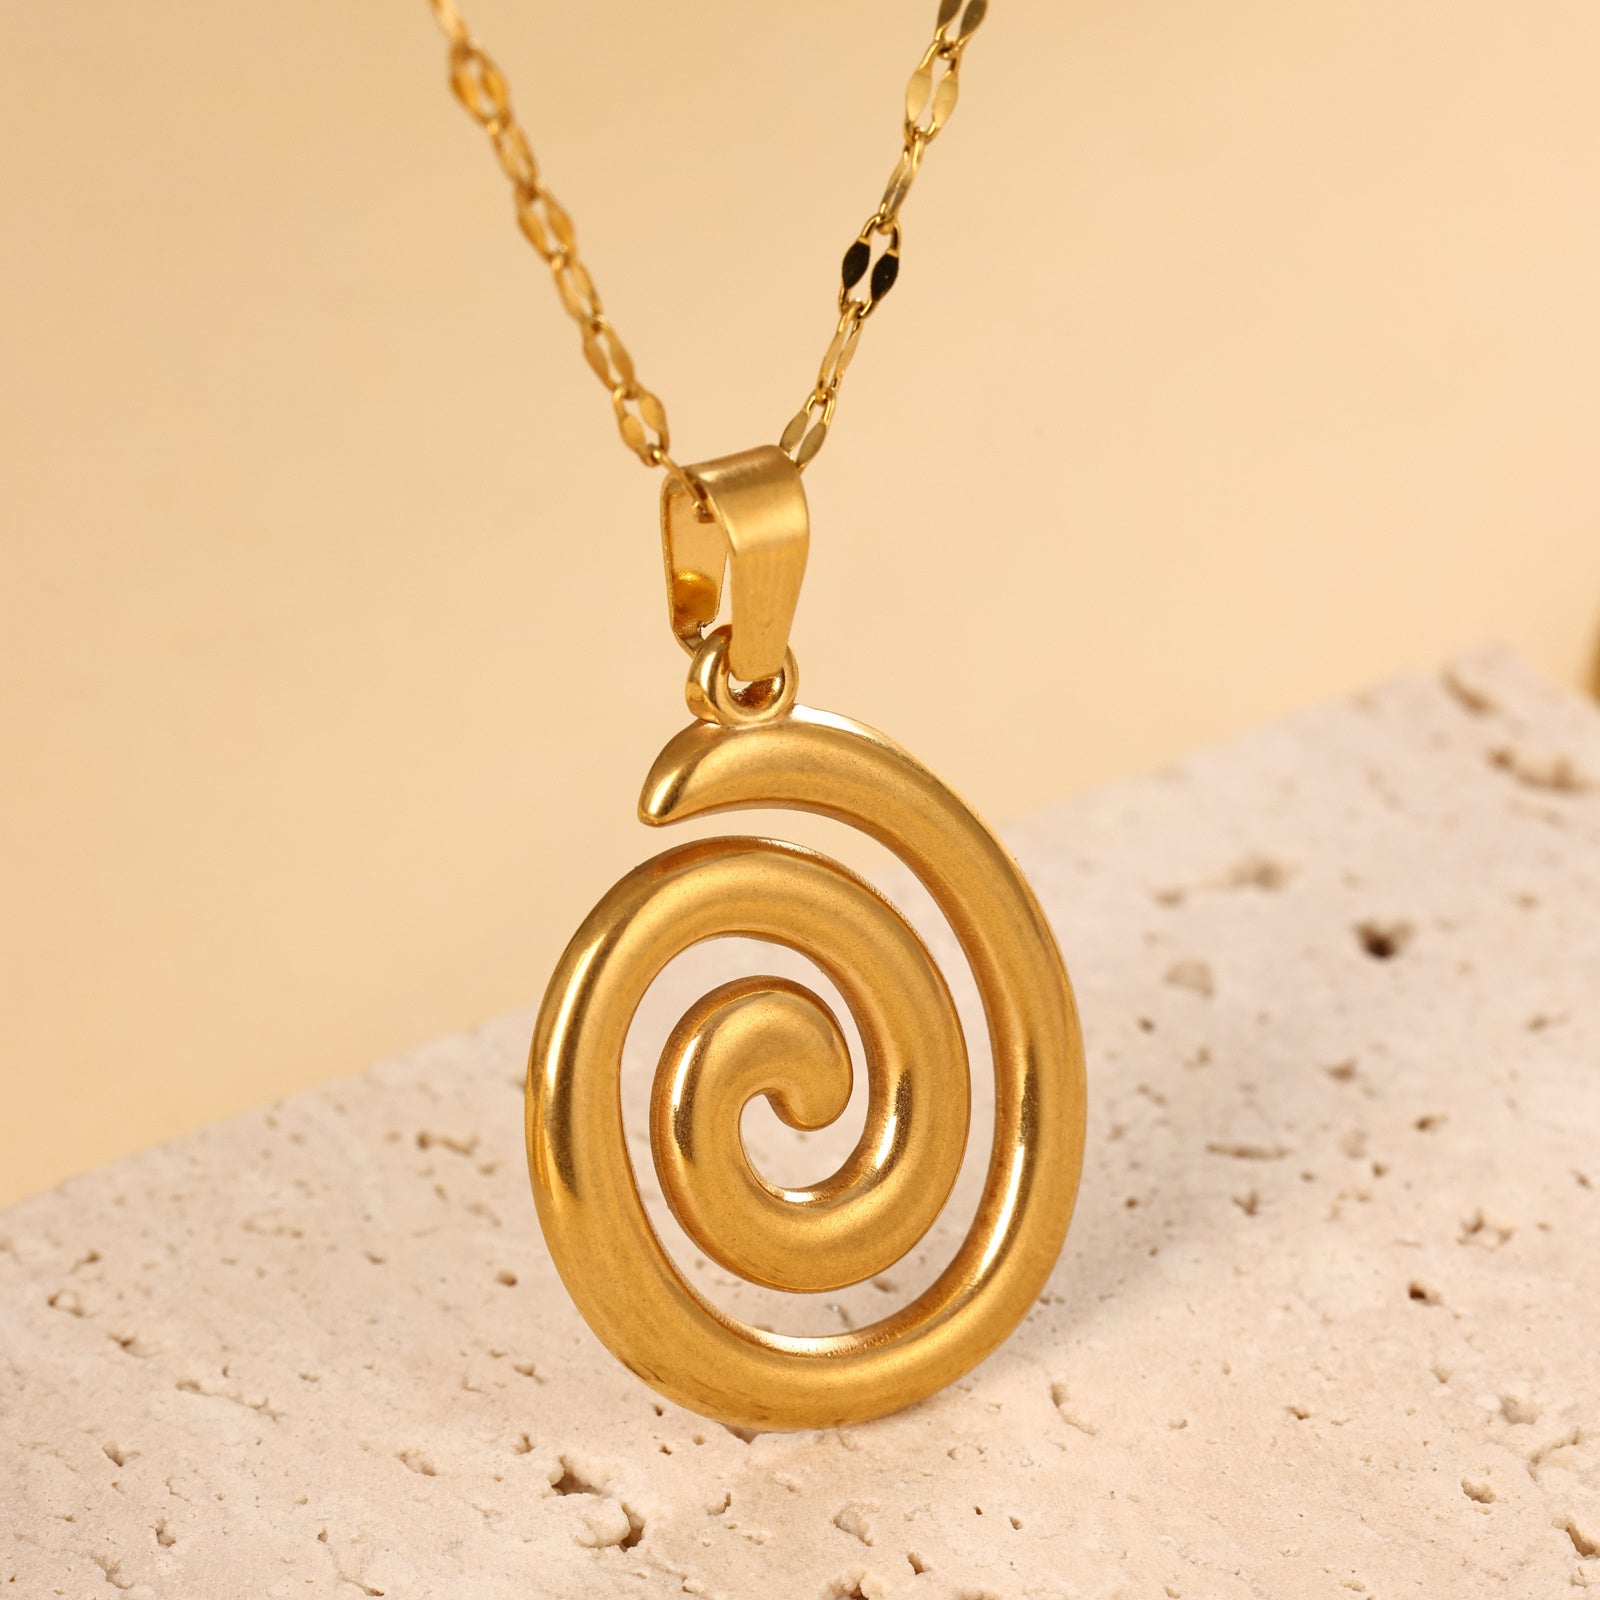 Unique And Niche Design Pendant, Stainless Steel Plated With 18k Gold, Creative And Versatile Geometric Vortex Necklace